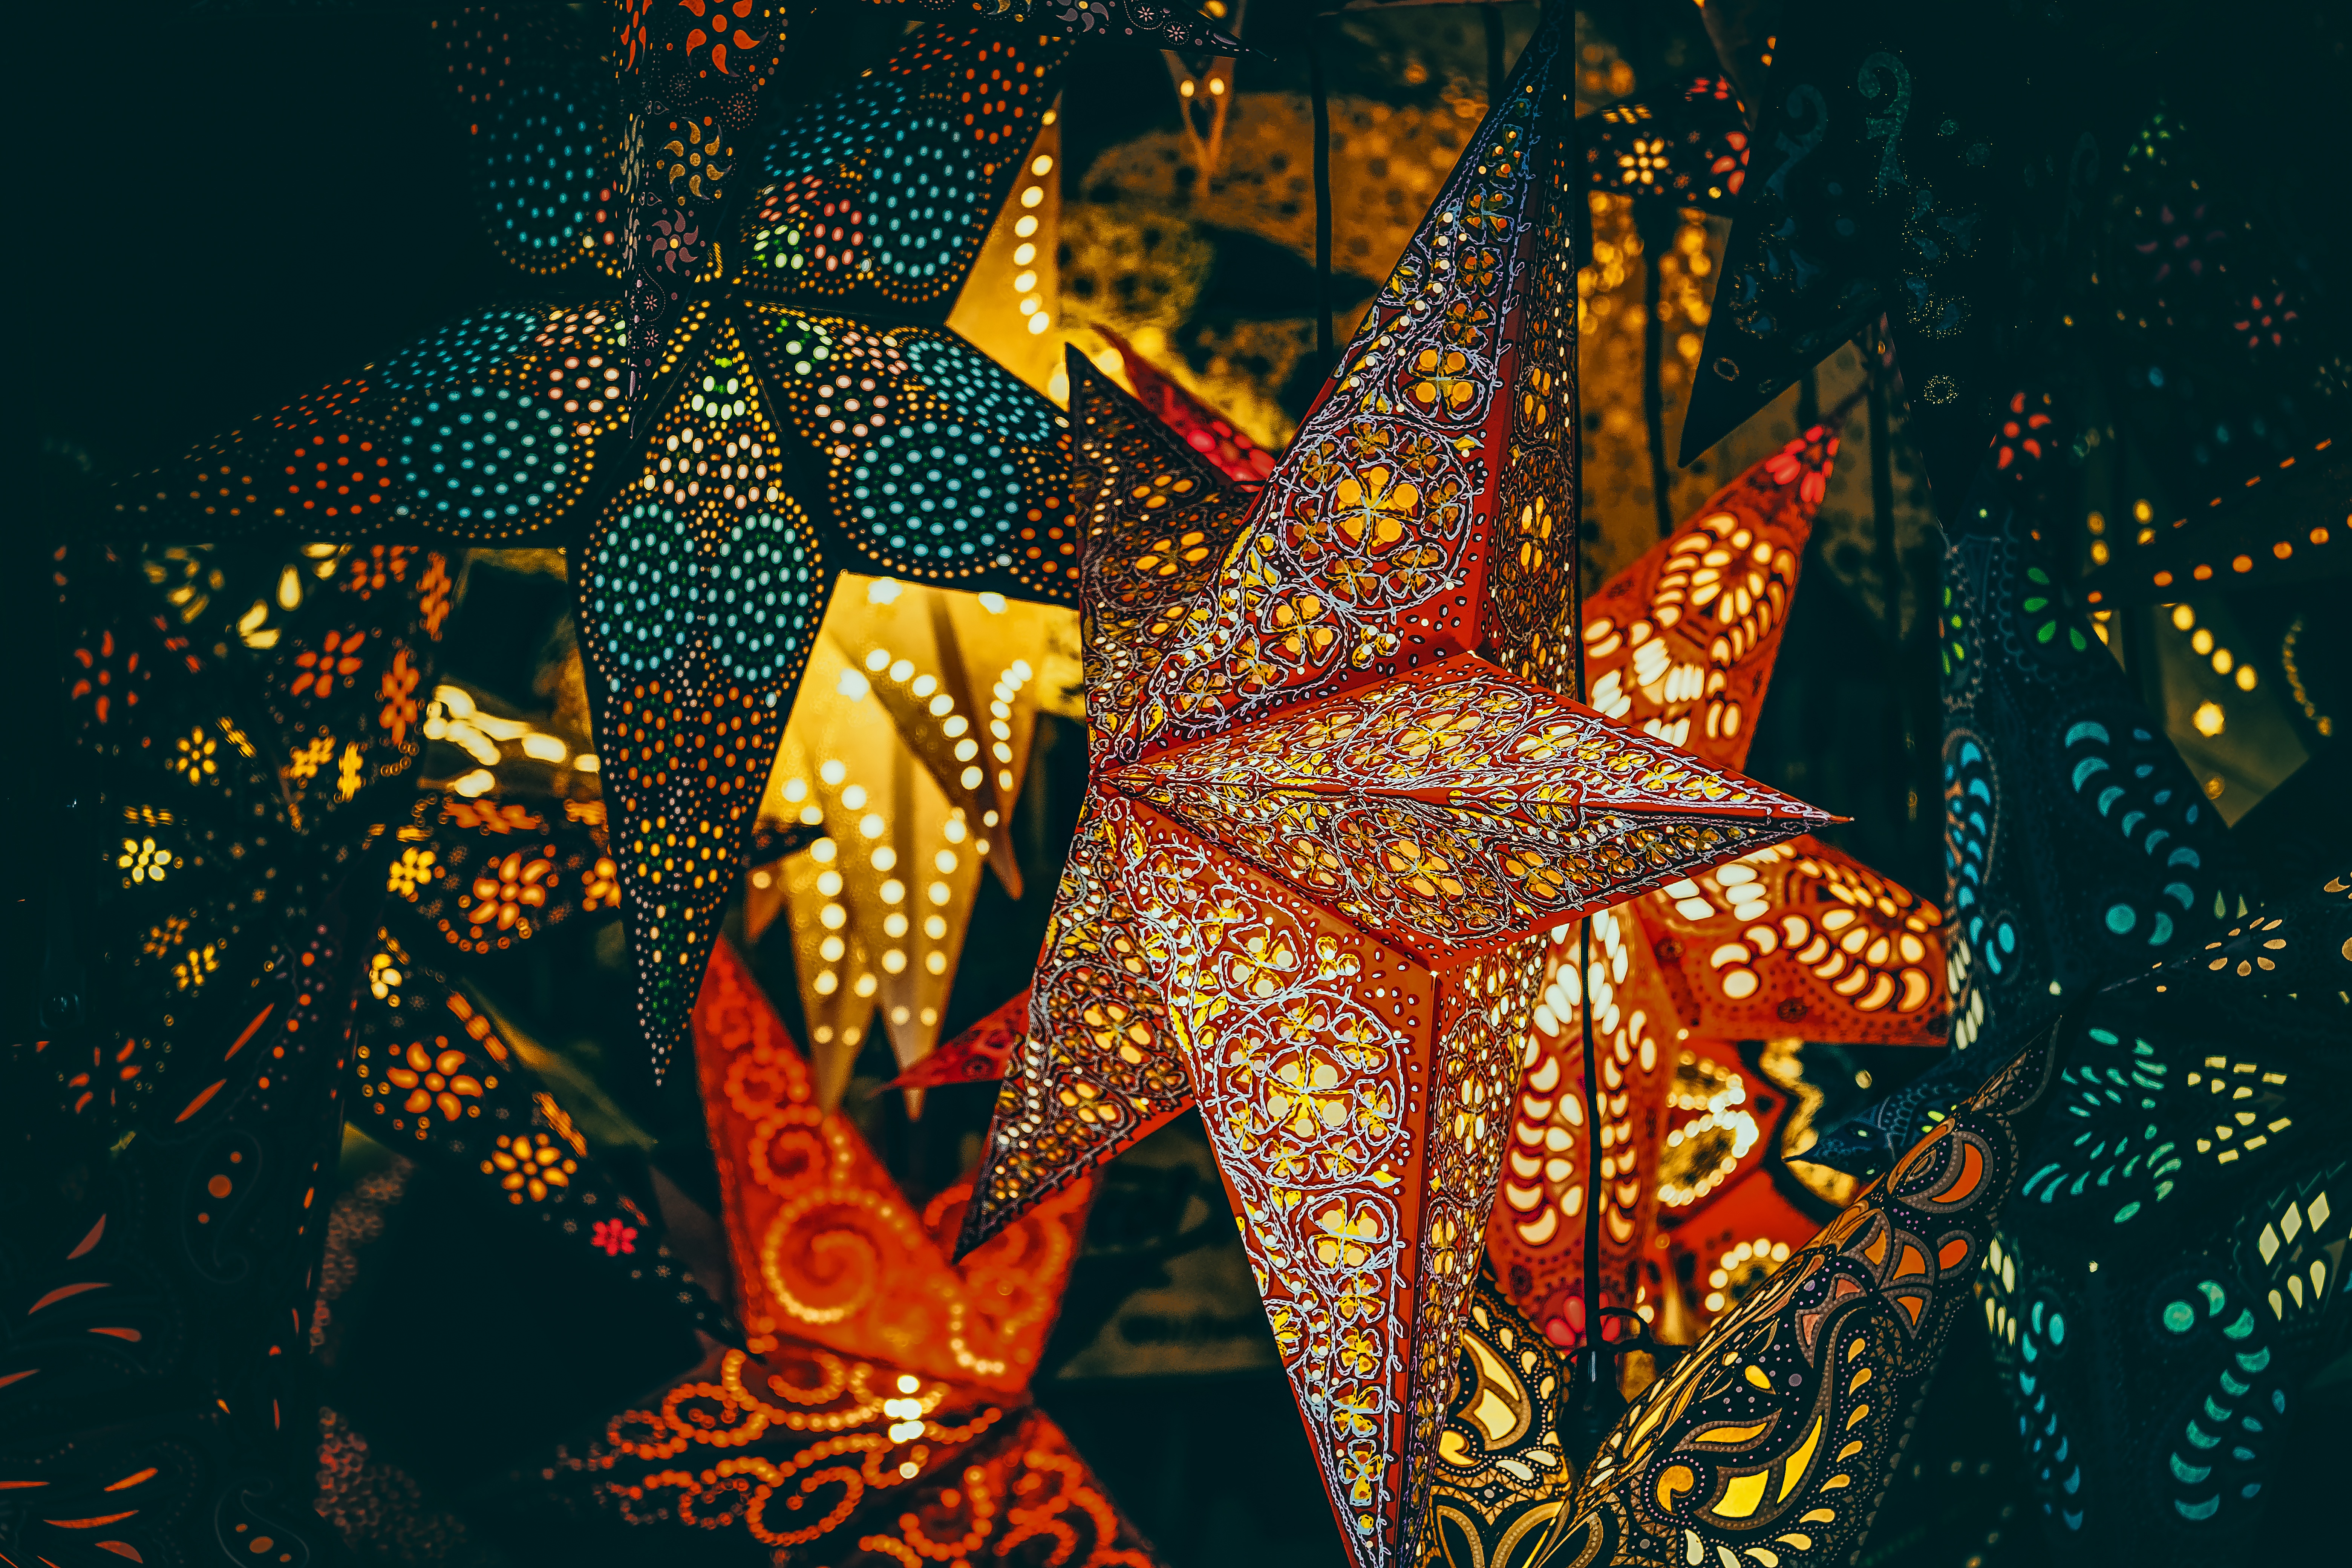 The image shows a collection of colorful, intricately designed paper lanterns. - Christmas lights